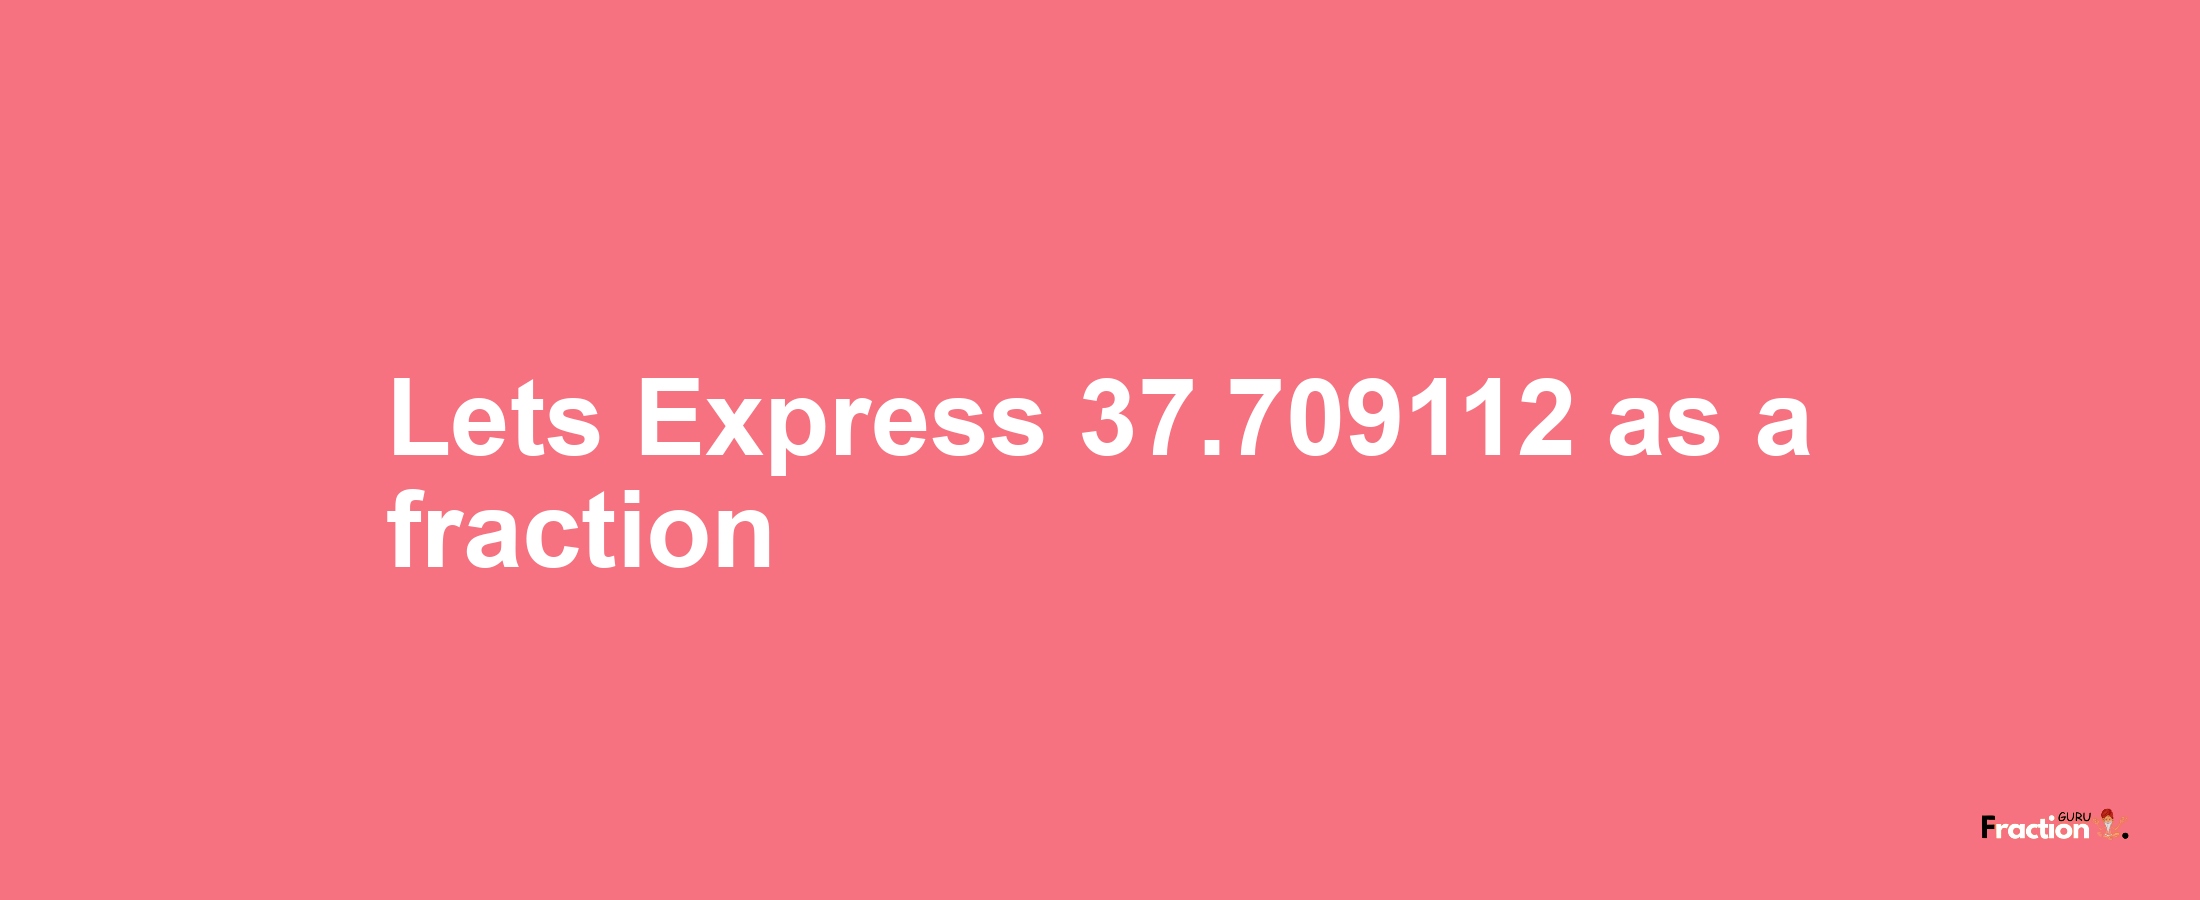 Lets Express 37.709112 as afraction